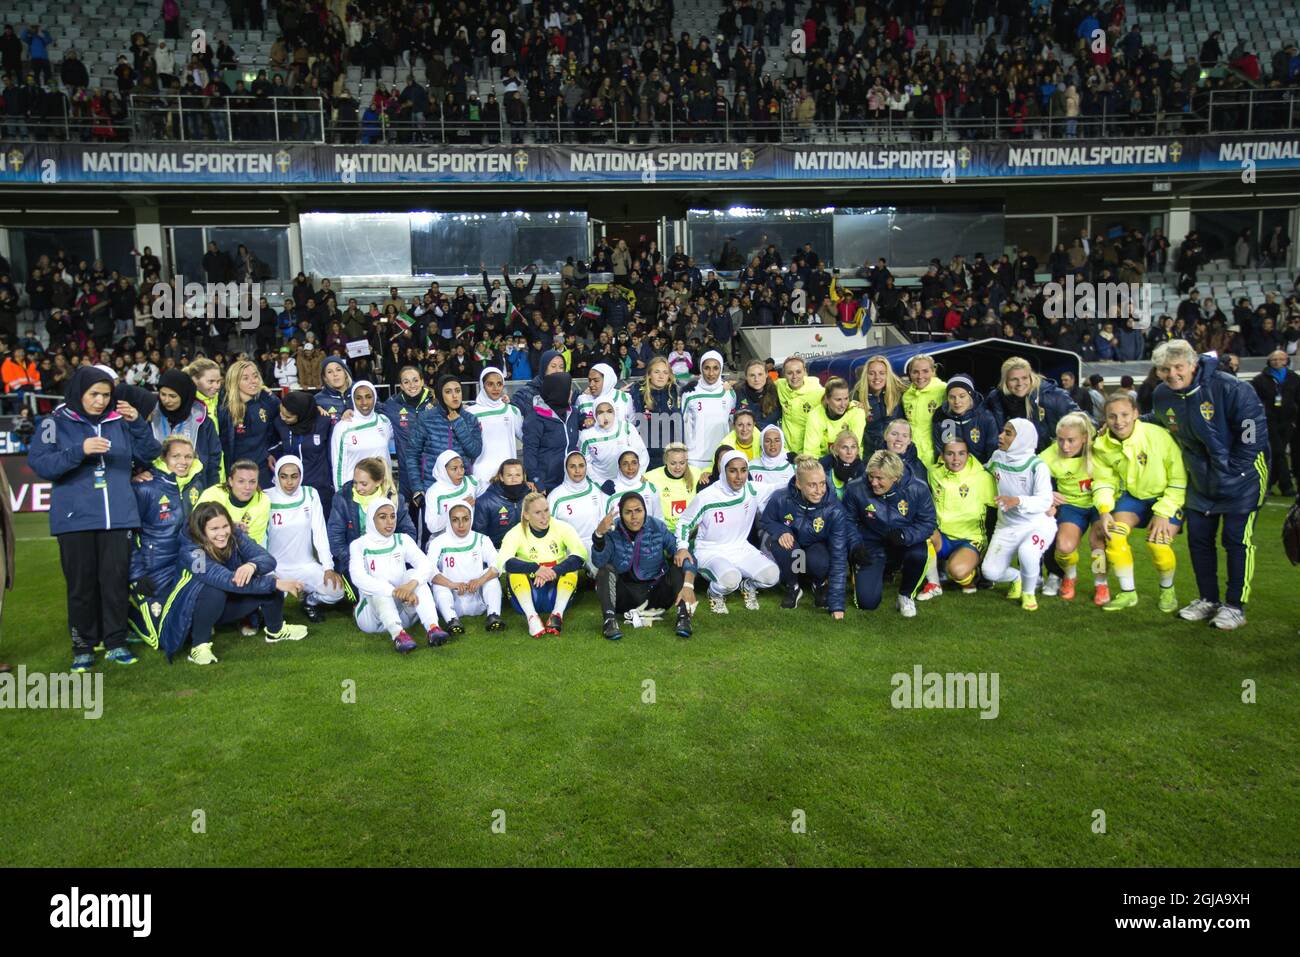 Sweden and Iran players pose for a group photo together after the international friendly soccer match between Sweden and Iran at the Old Ullevi Soccer Stadium in Goteborg, Sweden, October 21, 2016. Photo Thomas Johansson / TT / Kod 9200  Stock Photo